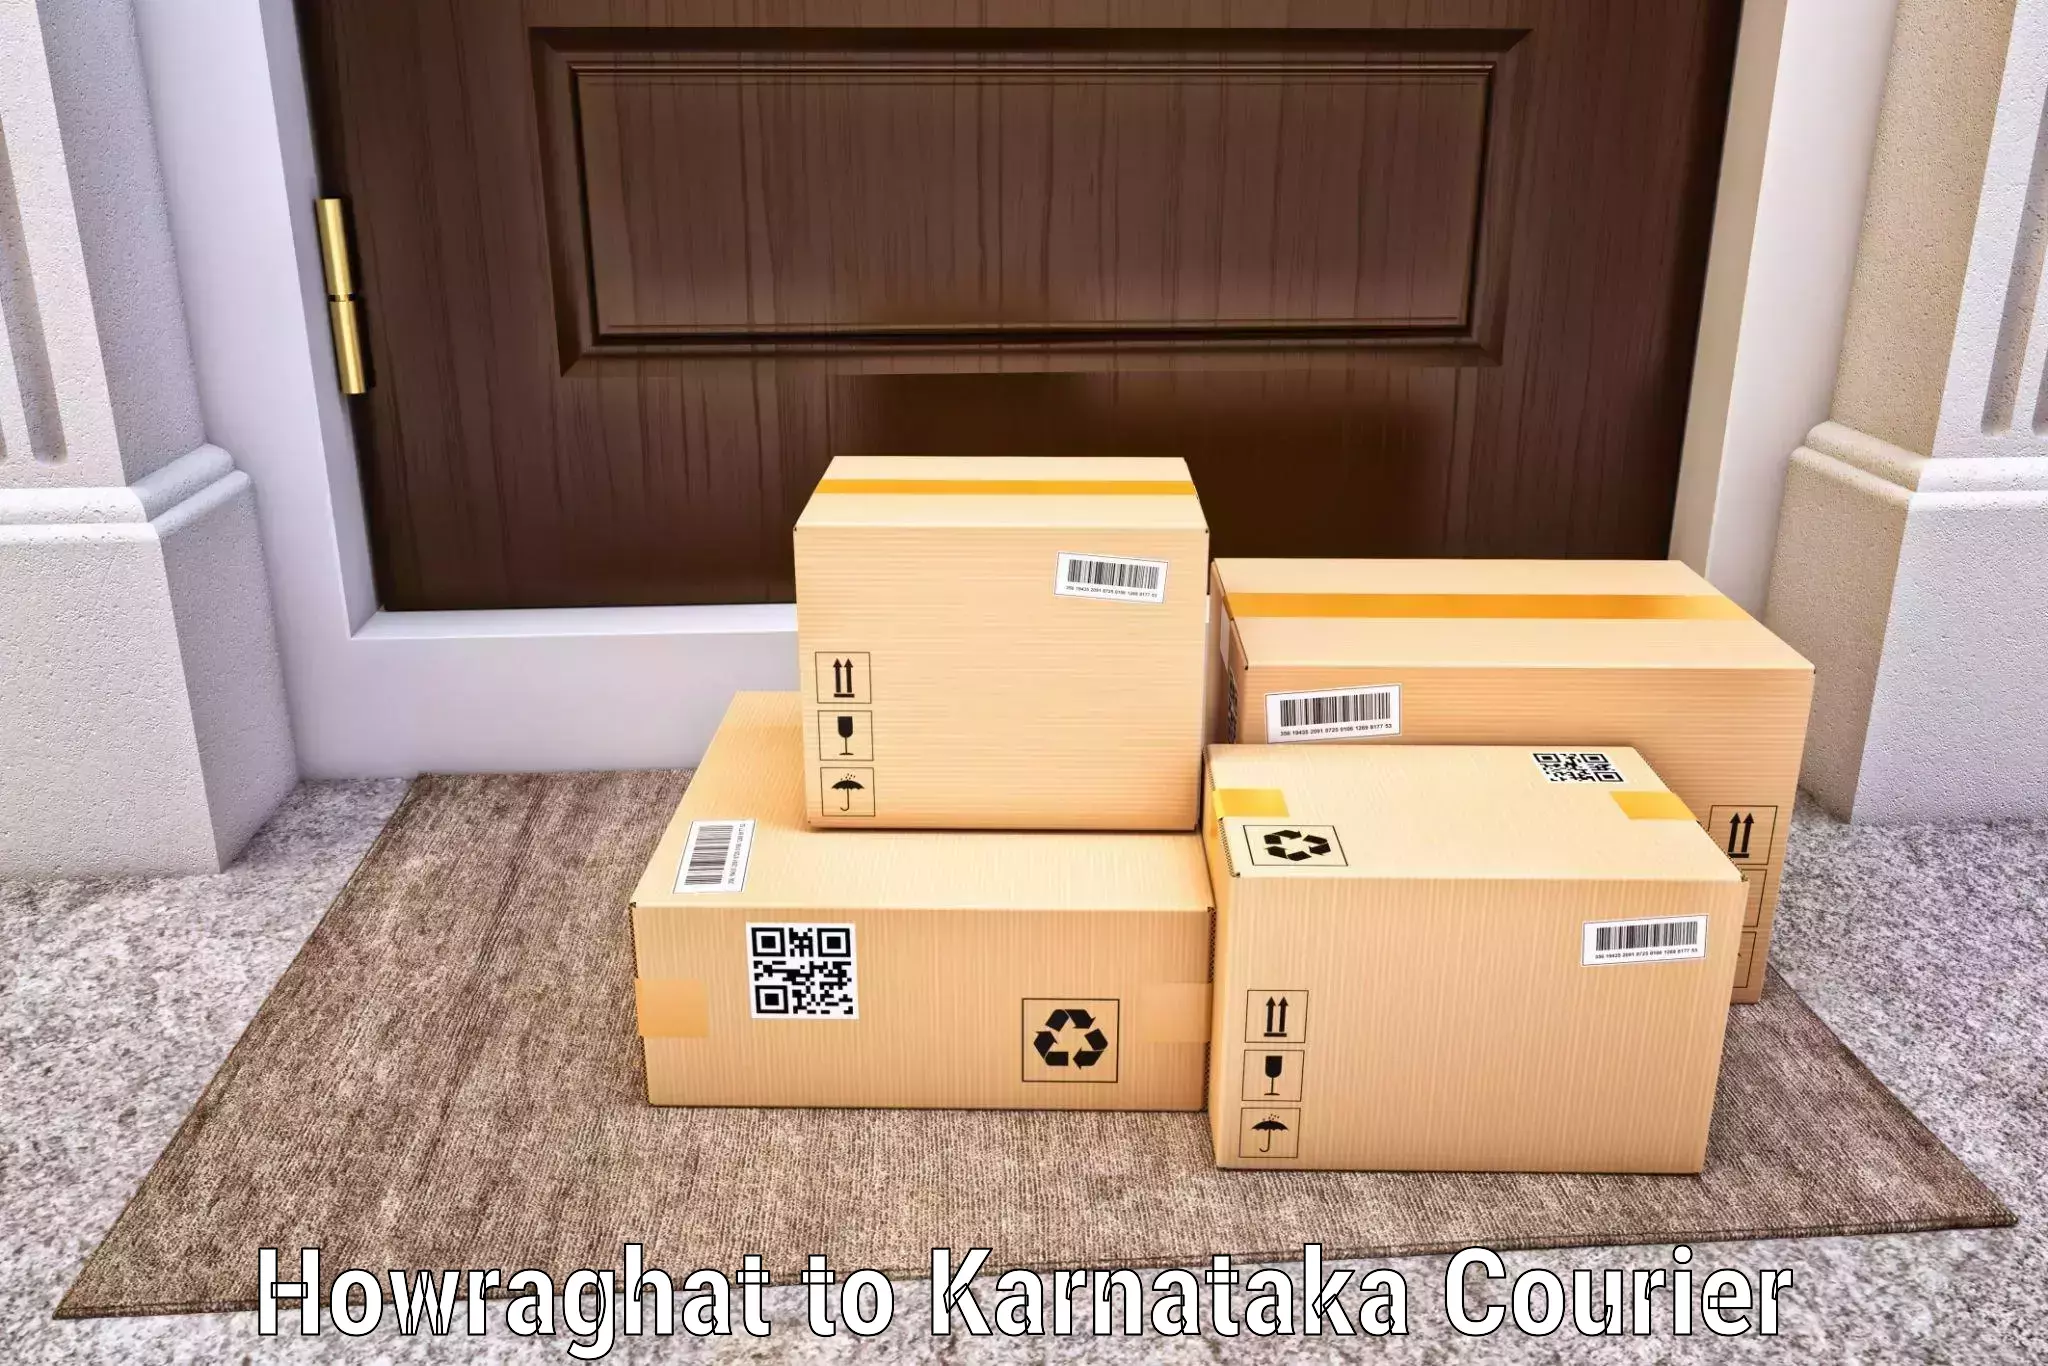 Quality courier services in Howraghat to Aland Kalaburagi